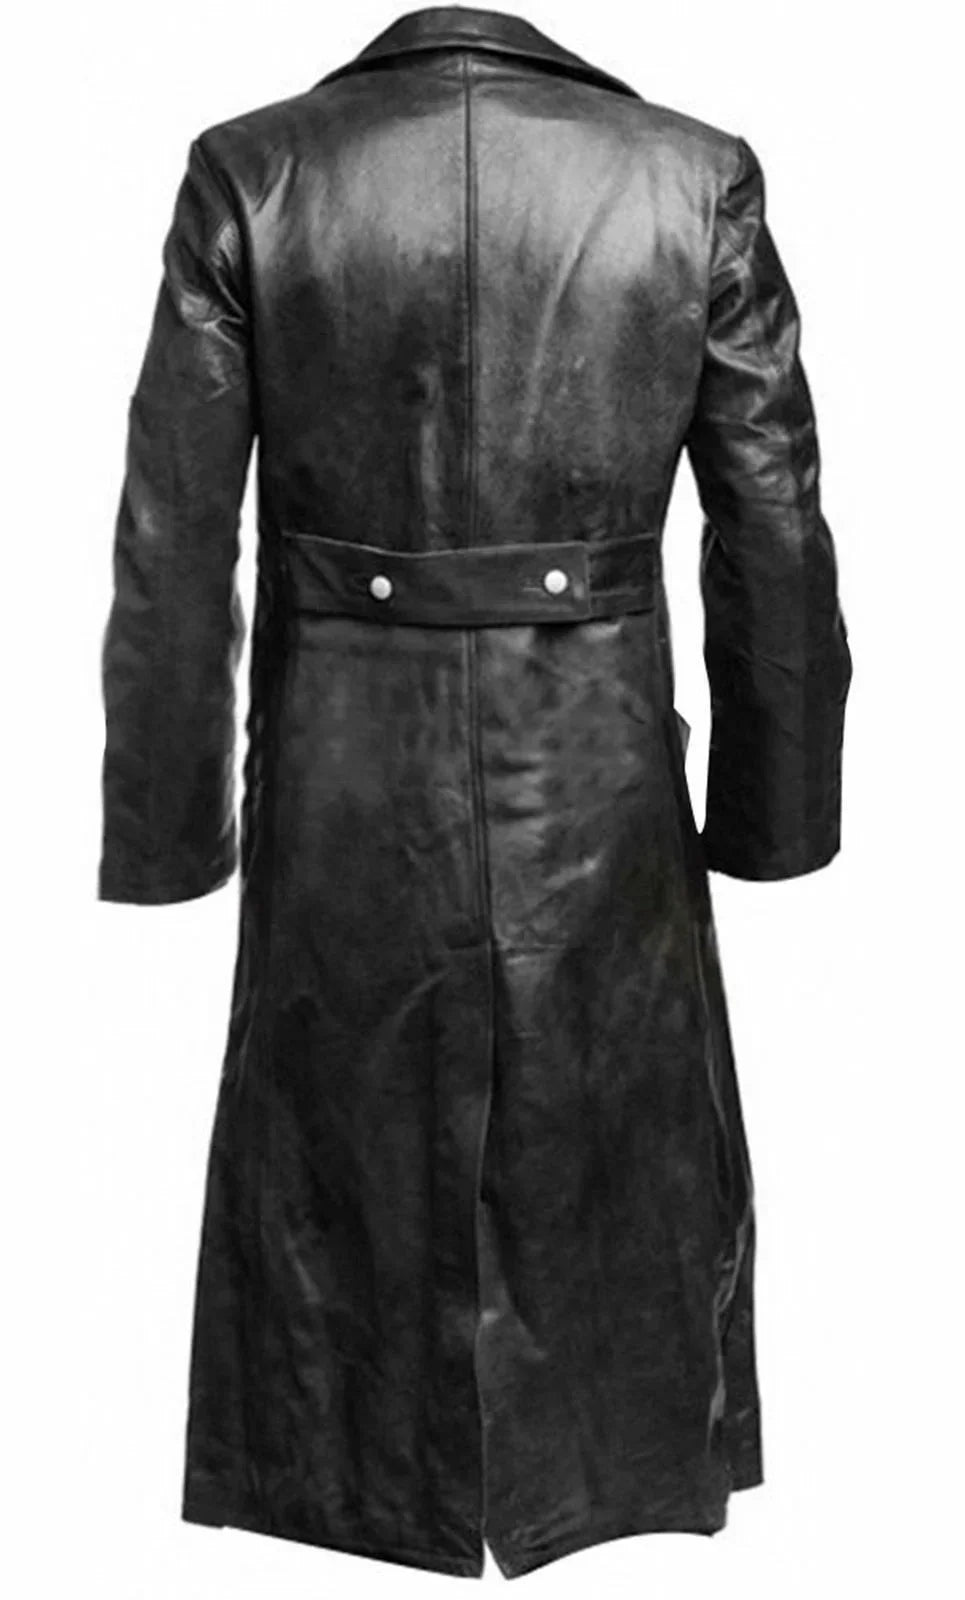 TPJB MEN'S Jackets GERMAN CLASSIC Faux Leather WW2 MILITARY UNIFORM OFFICER BLACK REAL LEATHER TRENCH COAT